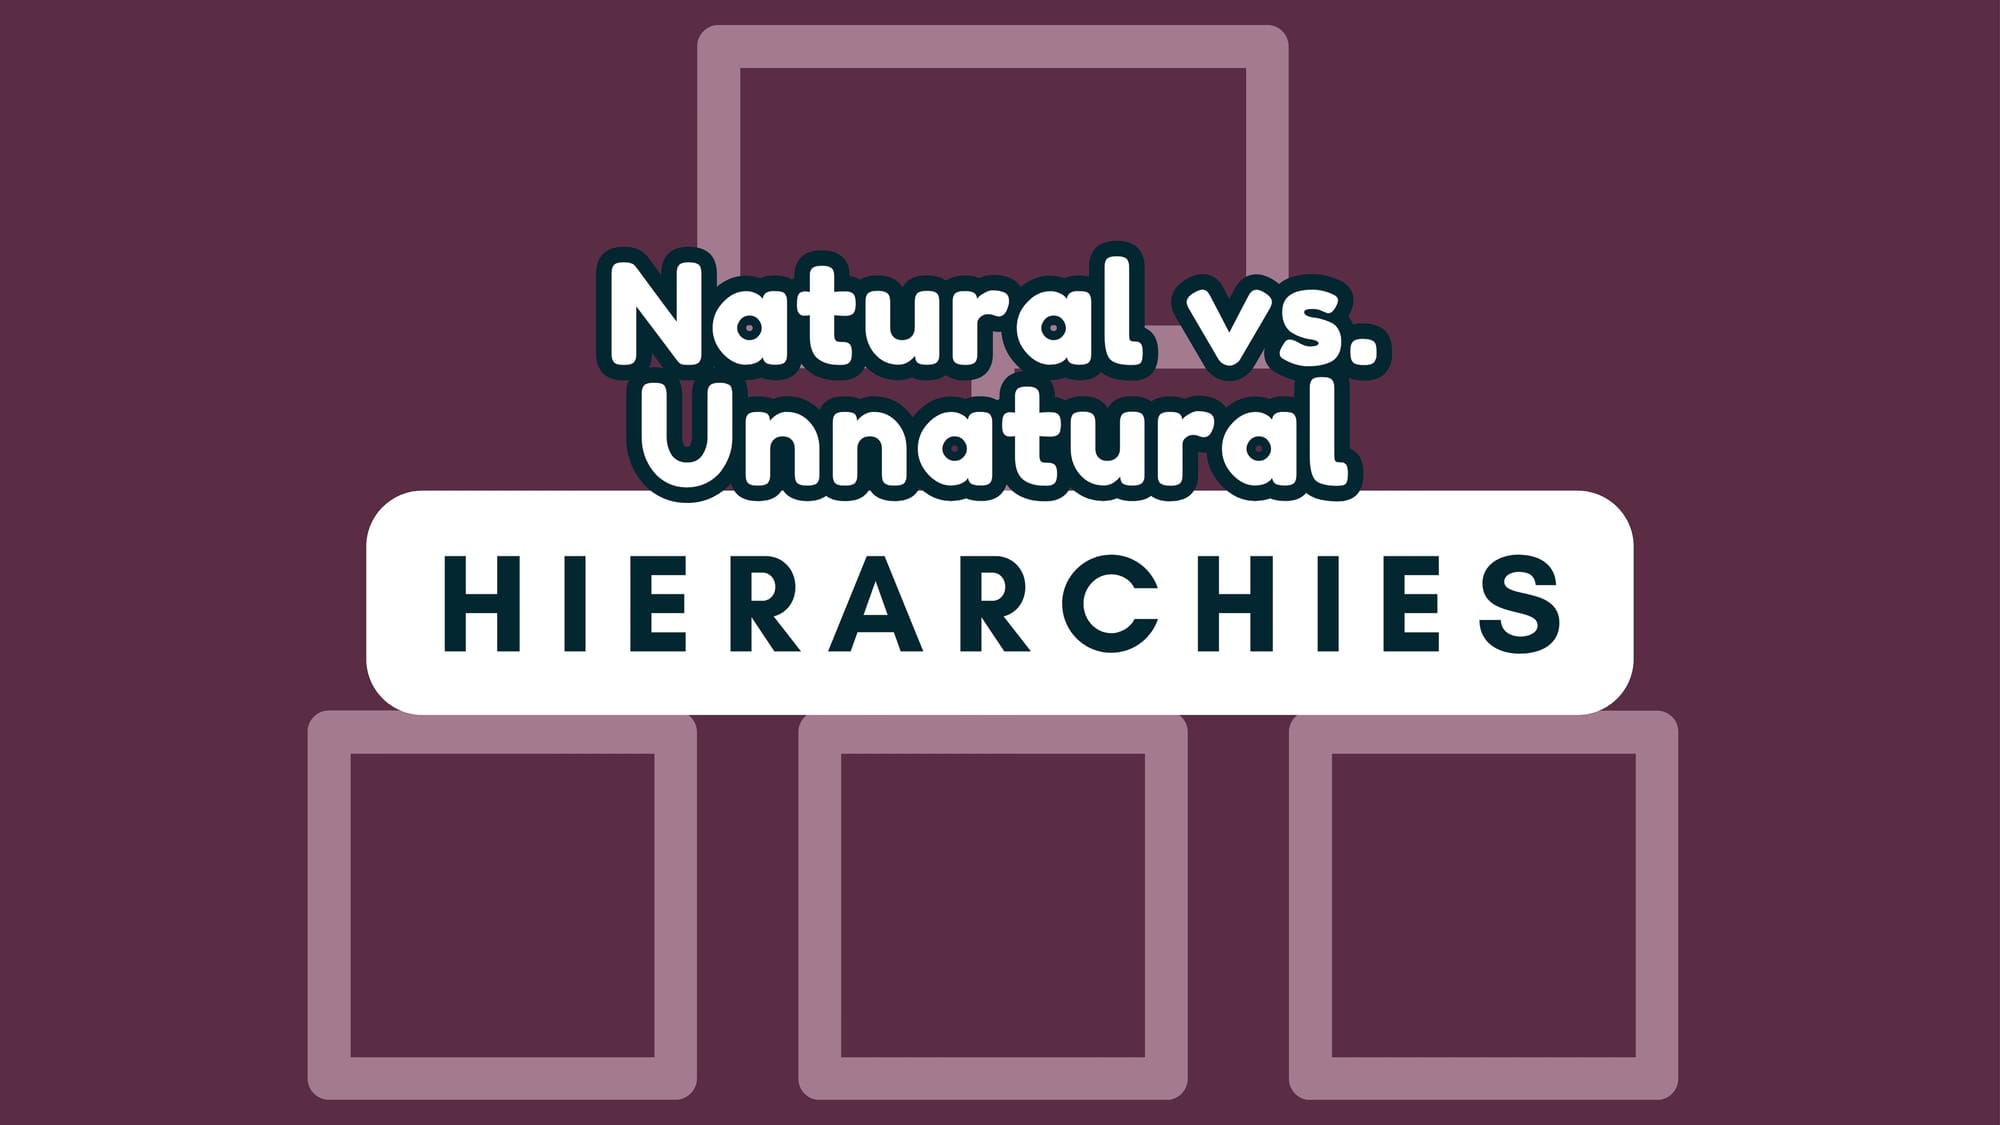 A block diagram is in the background with the overlap "natural vs. unnatural hierarchies."